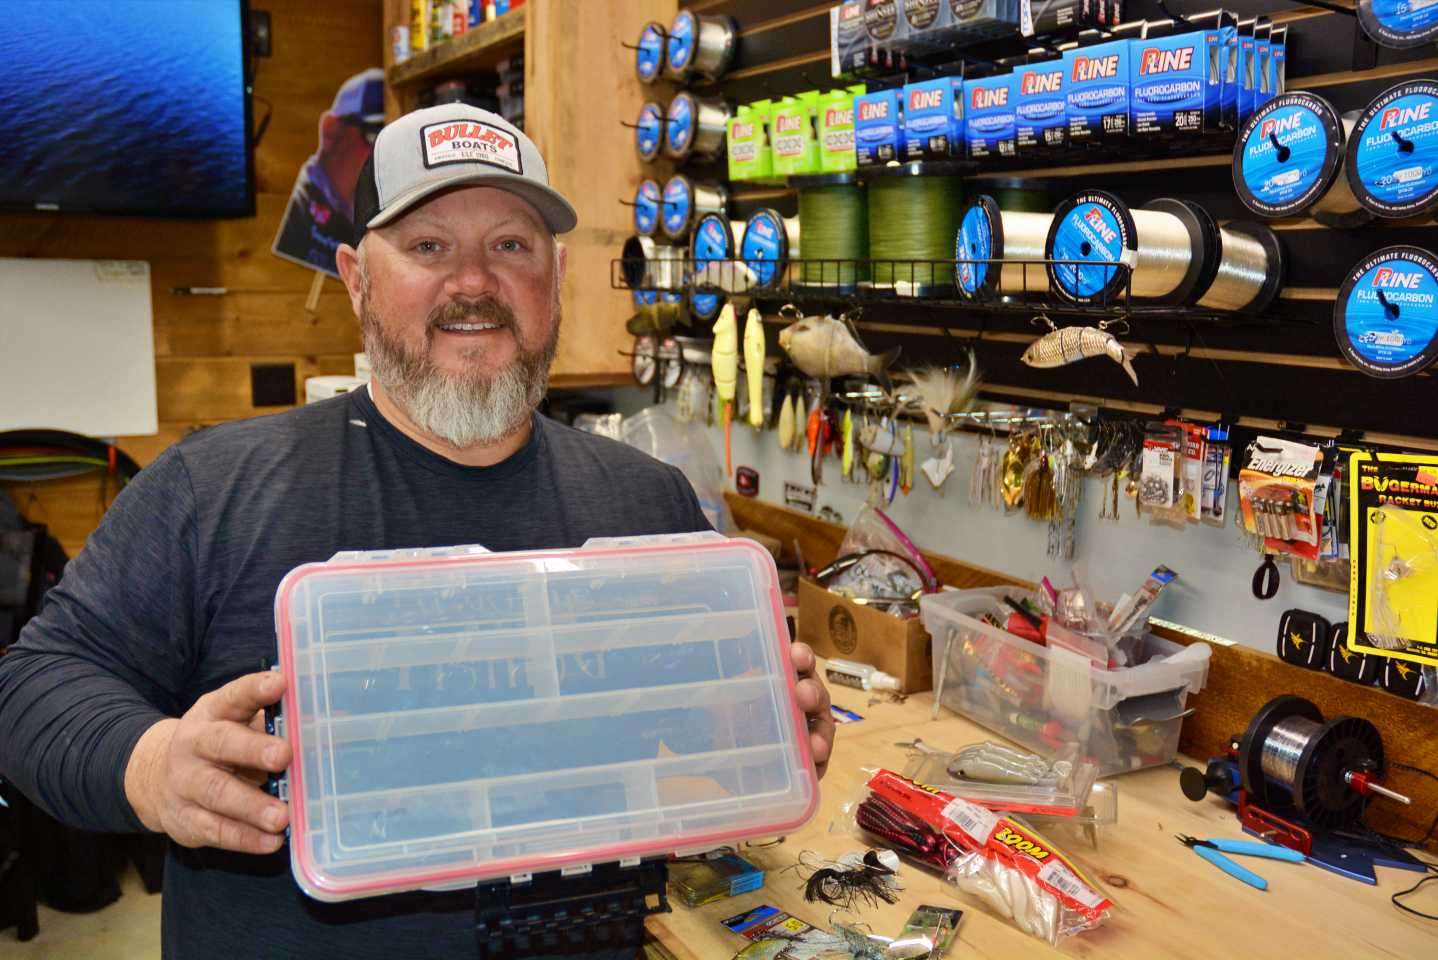 Bassmaster Elite Series pro Buddy Gross is ready to fill this utility box with his recommendations for a beginnerâs tacklebox. âI chose baits that are versatile and that can be used easily by beginners.â  